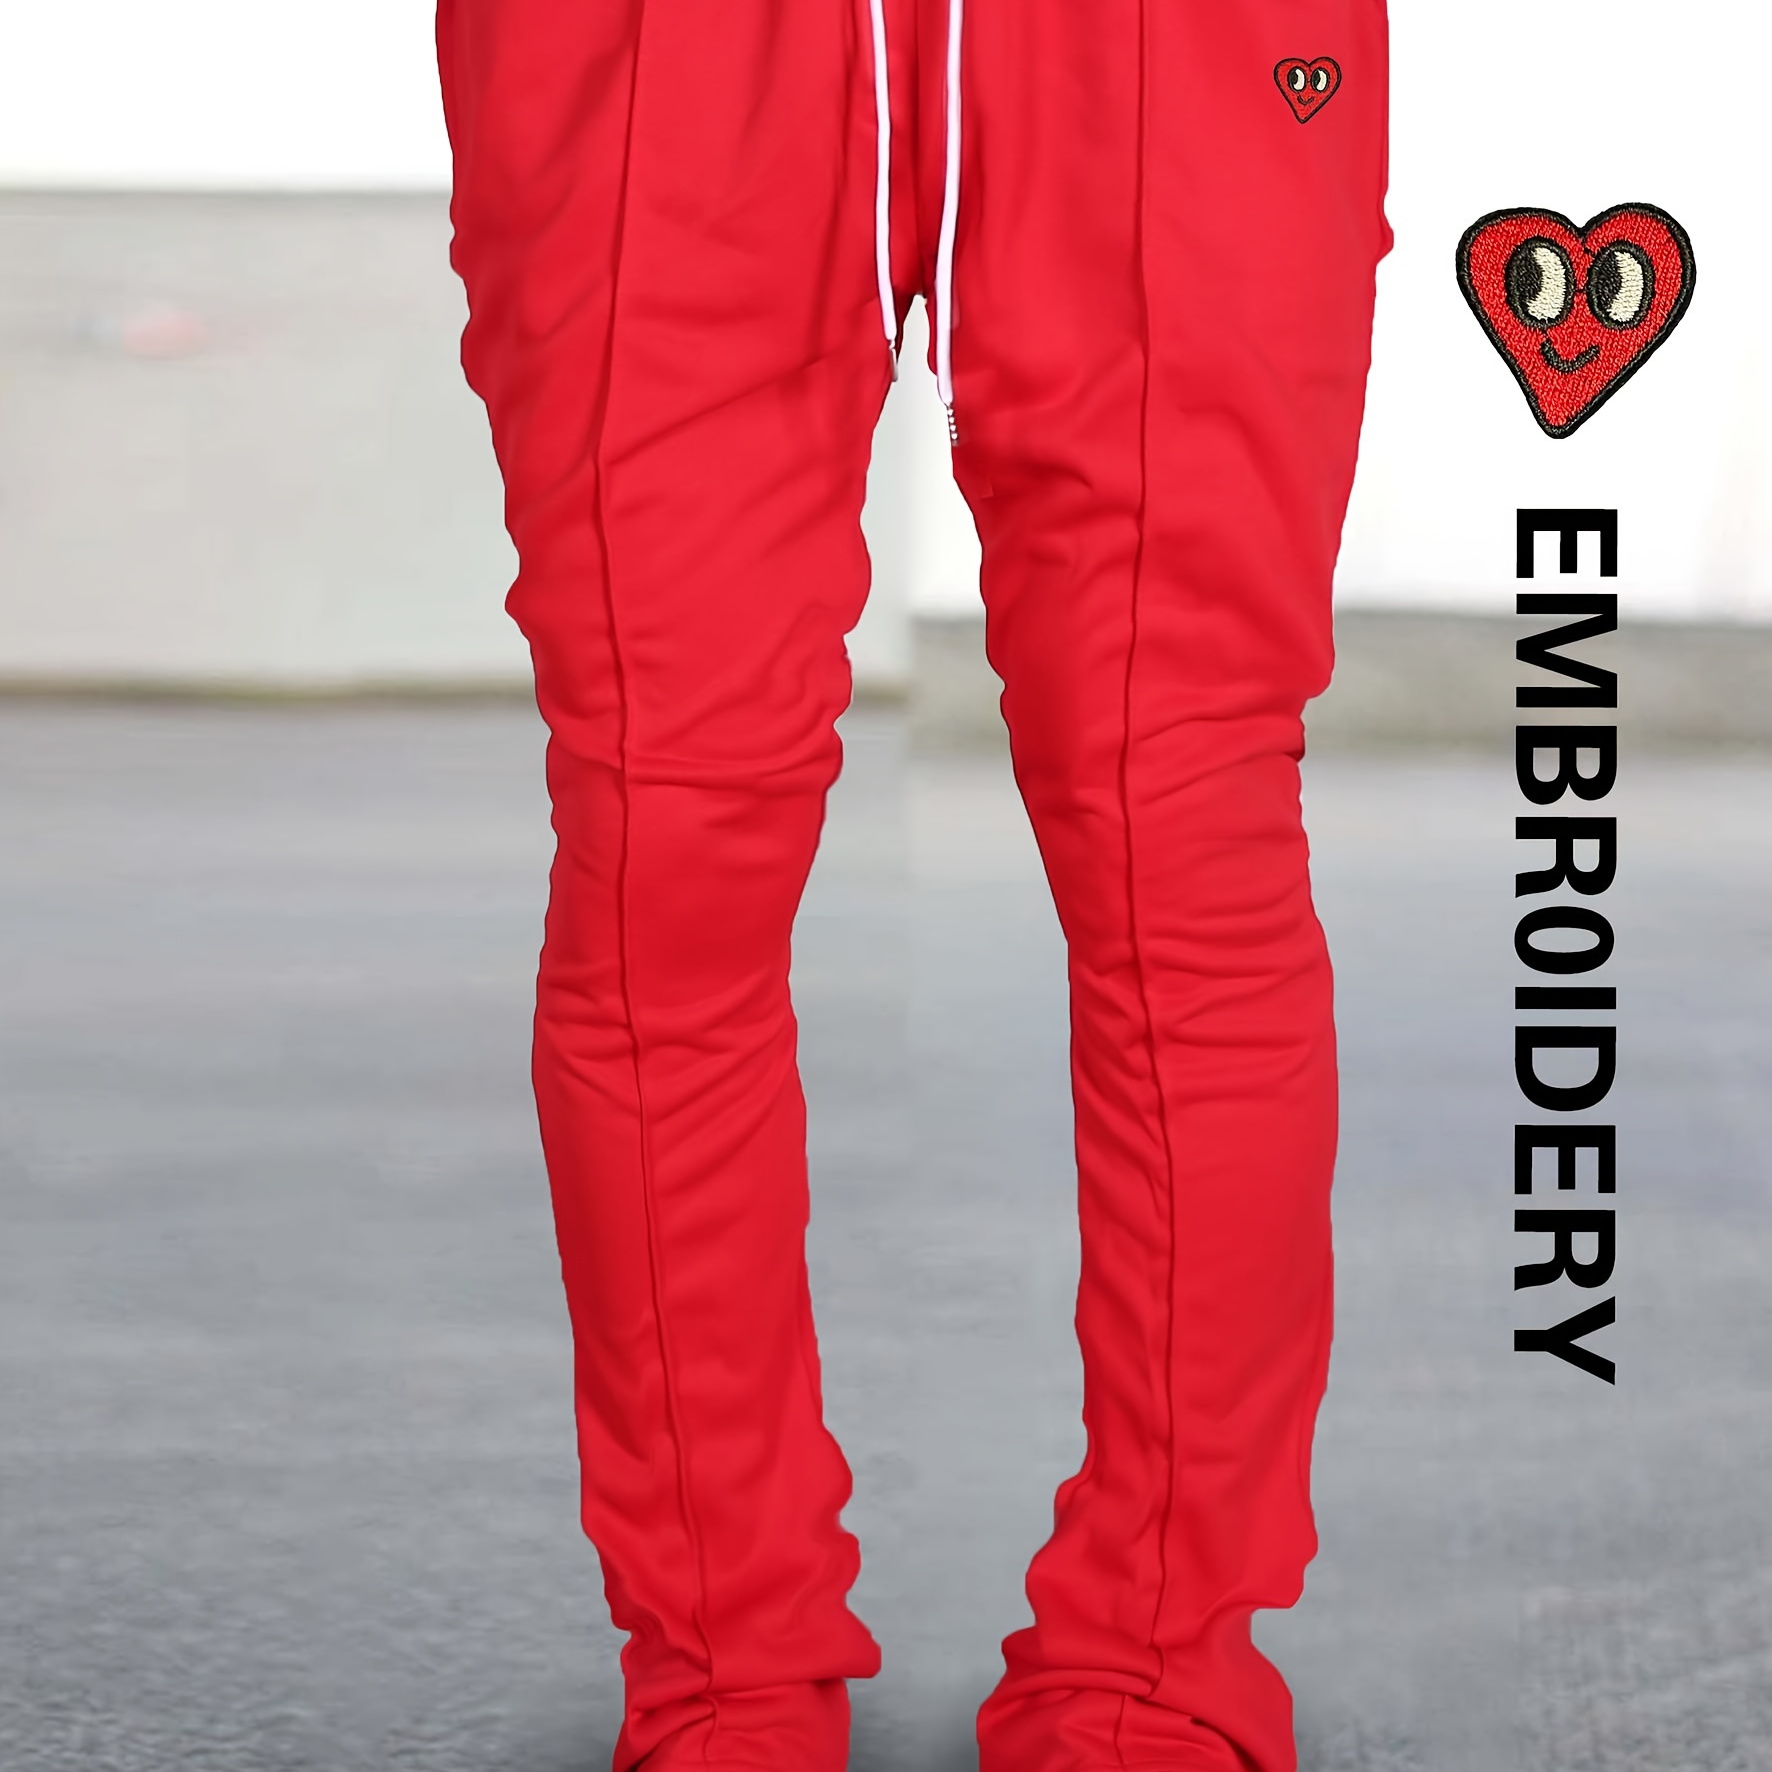 

Love With Eyes Embroidery Men's New Bell-bottom Pants, Fashion Drawstring Flared Trousers Sweatpants, Loose Casual Hip Hop Style Trousers For Spring Autumn Running Jogging Outdoor Fitness